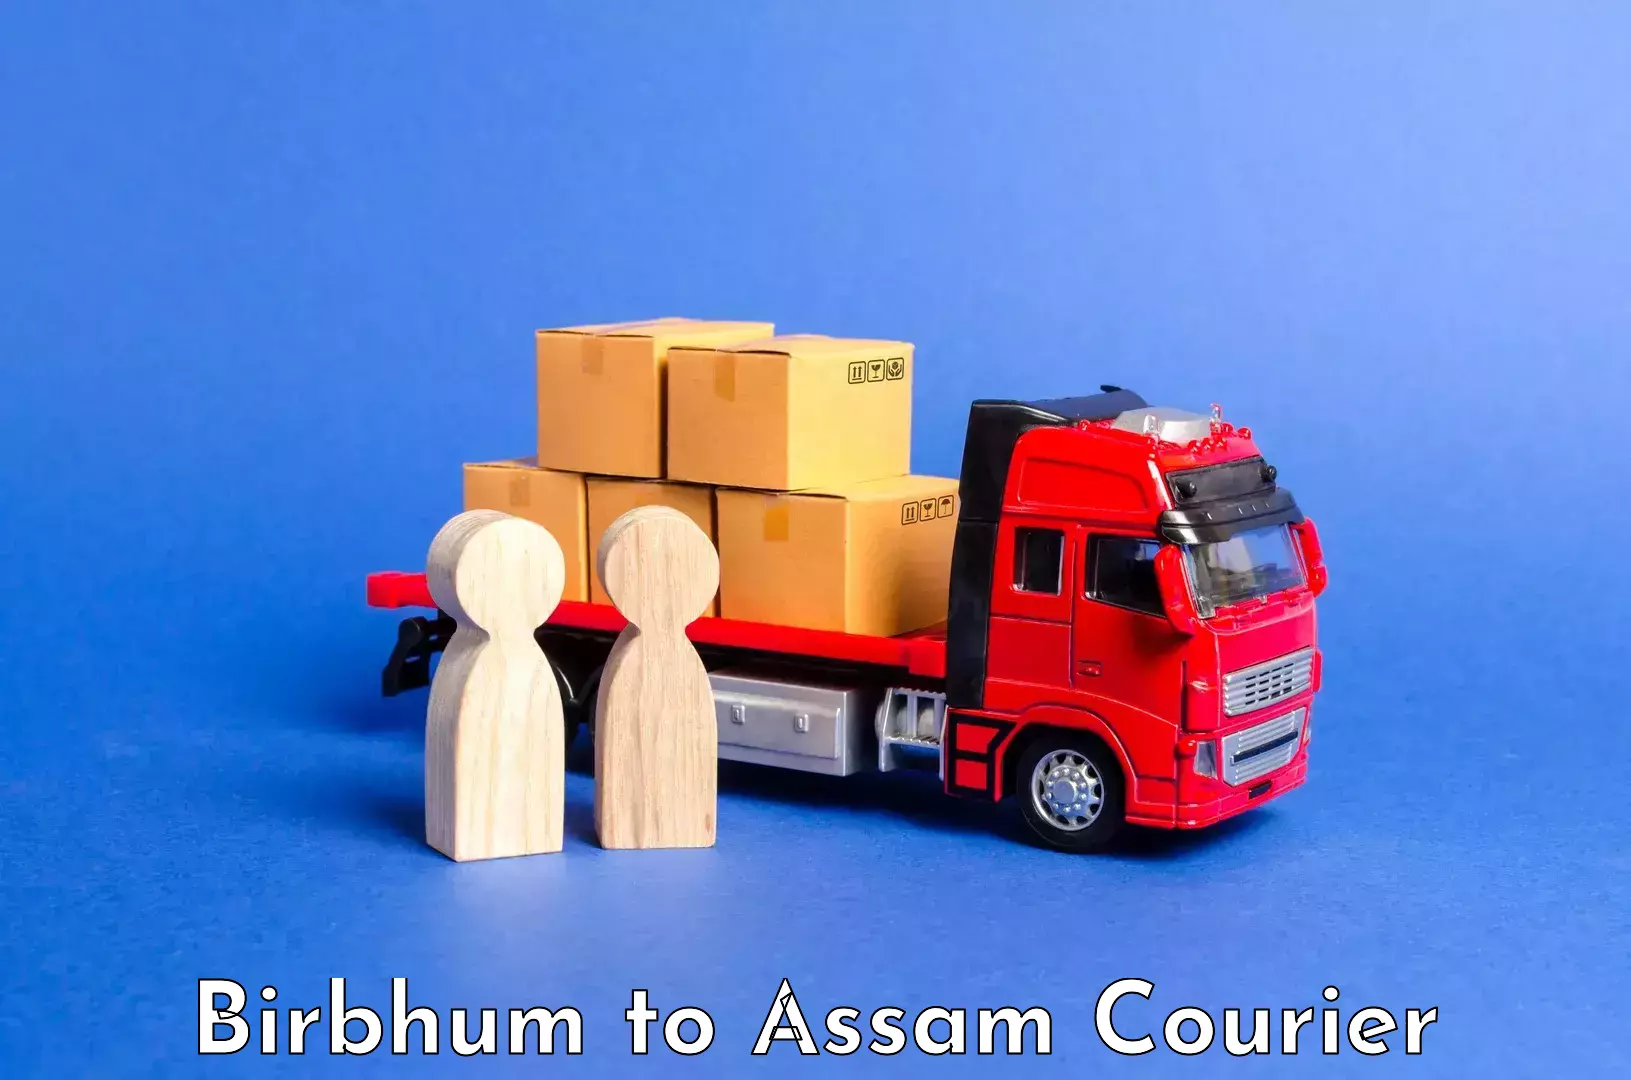 Luggage delivery network Birbhum to Lala Assam